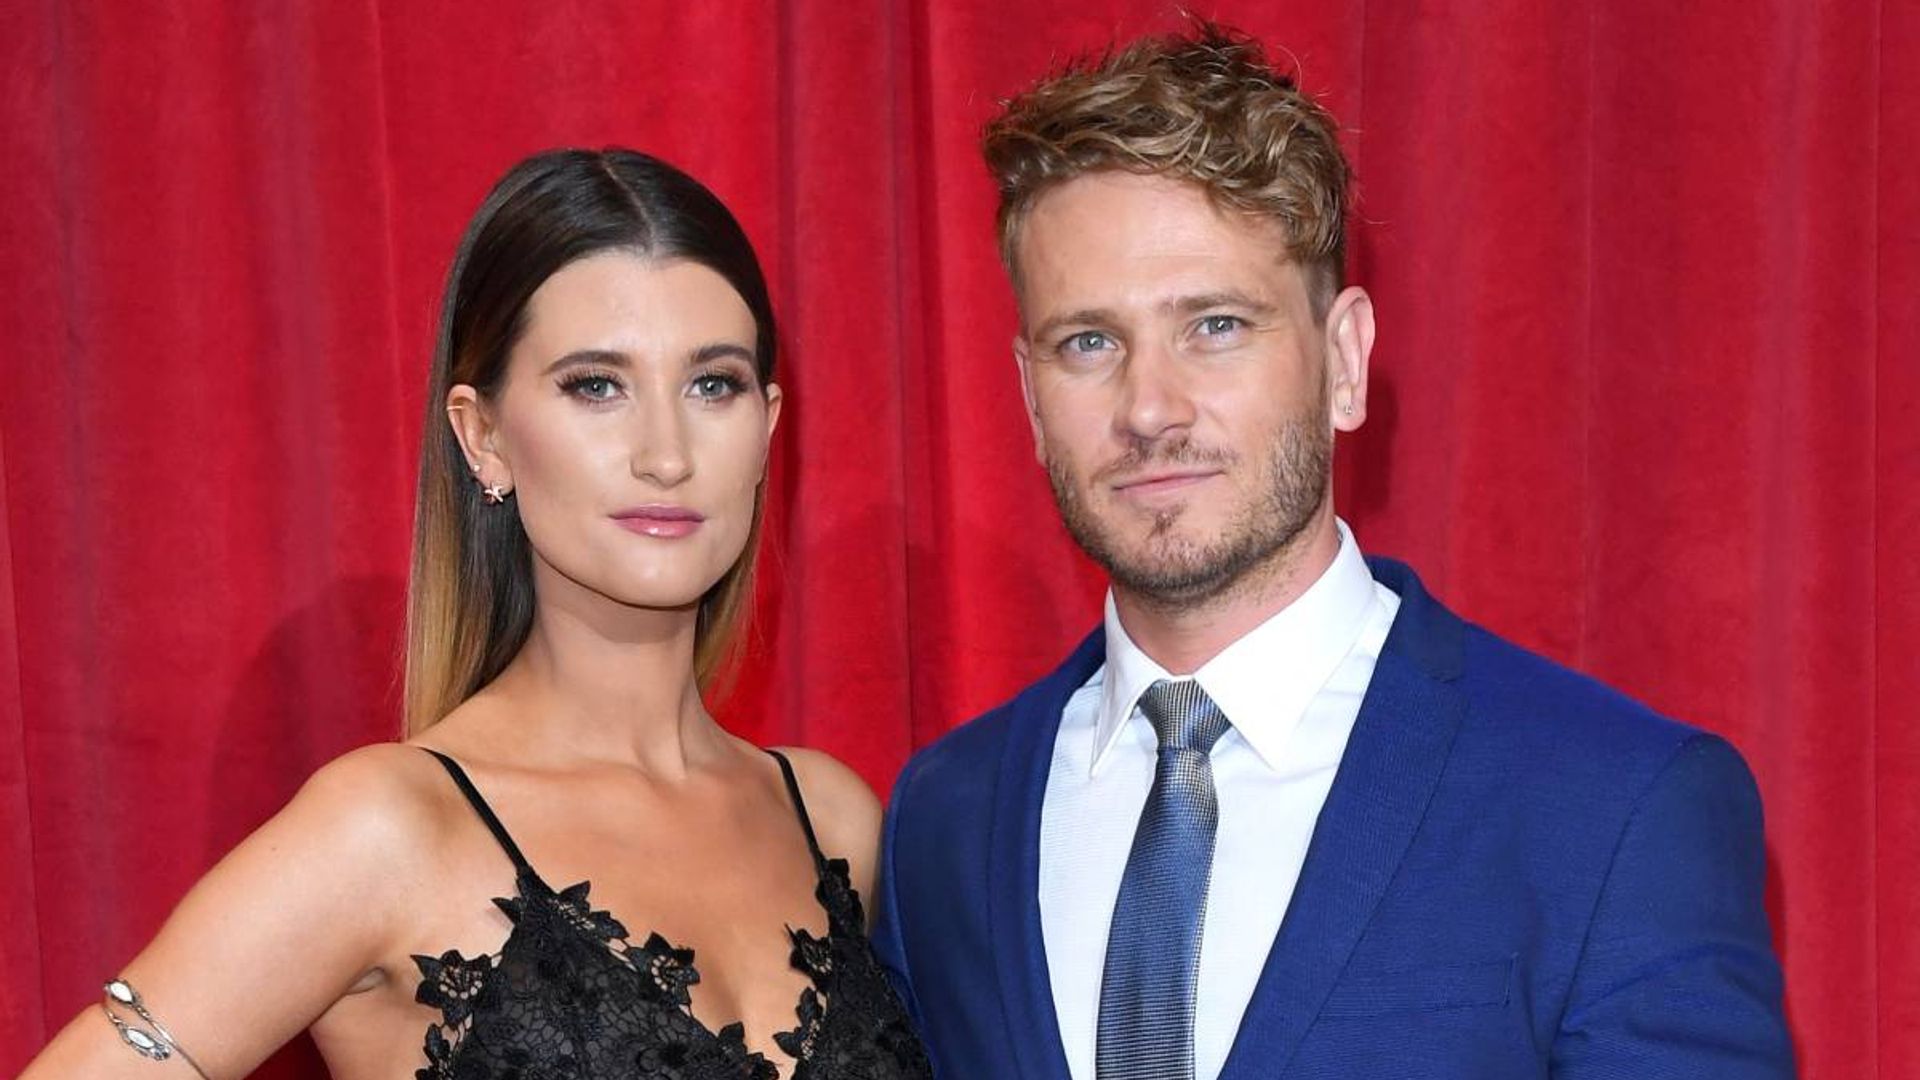 Charley Webb celebrates wedding anniversary, and baby son Ace gets special mention